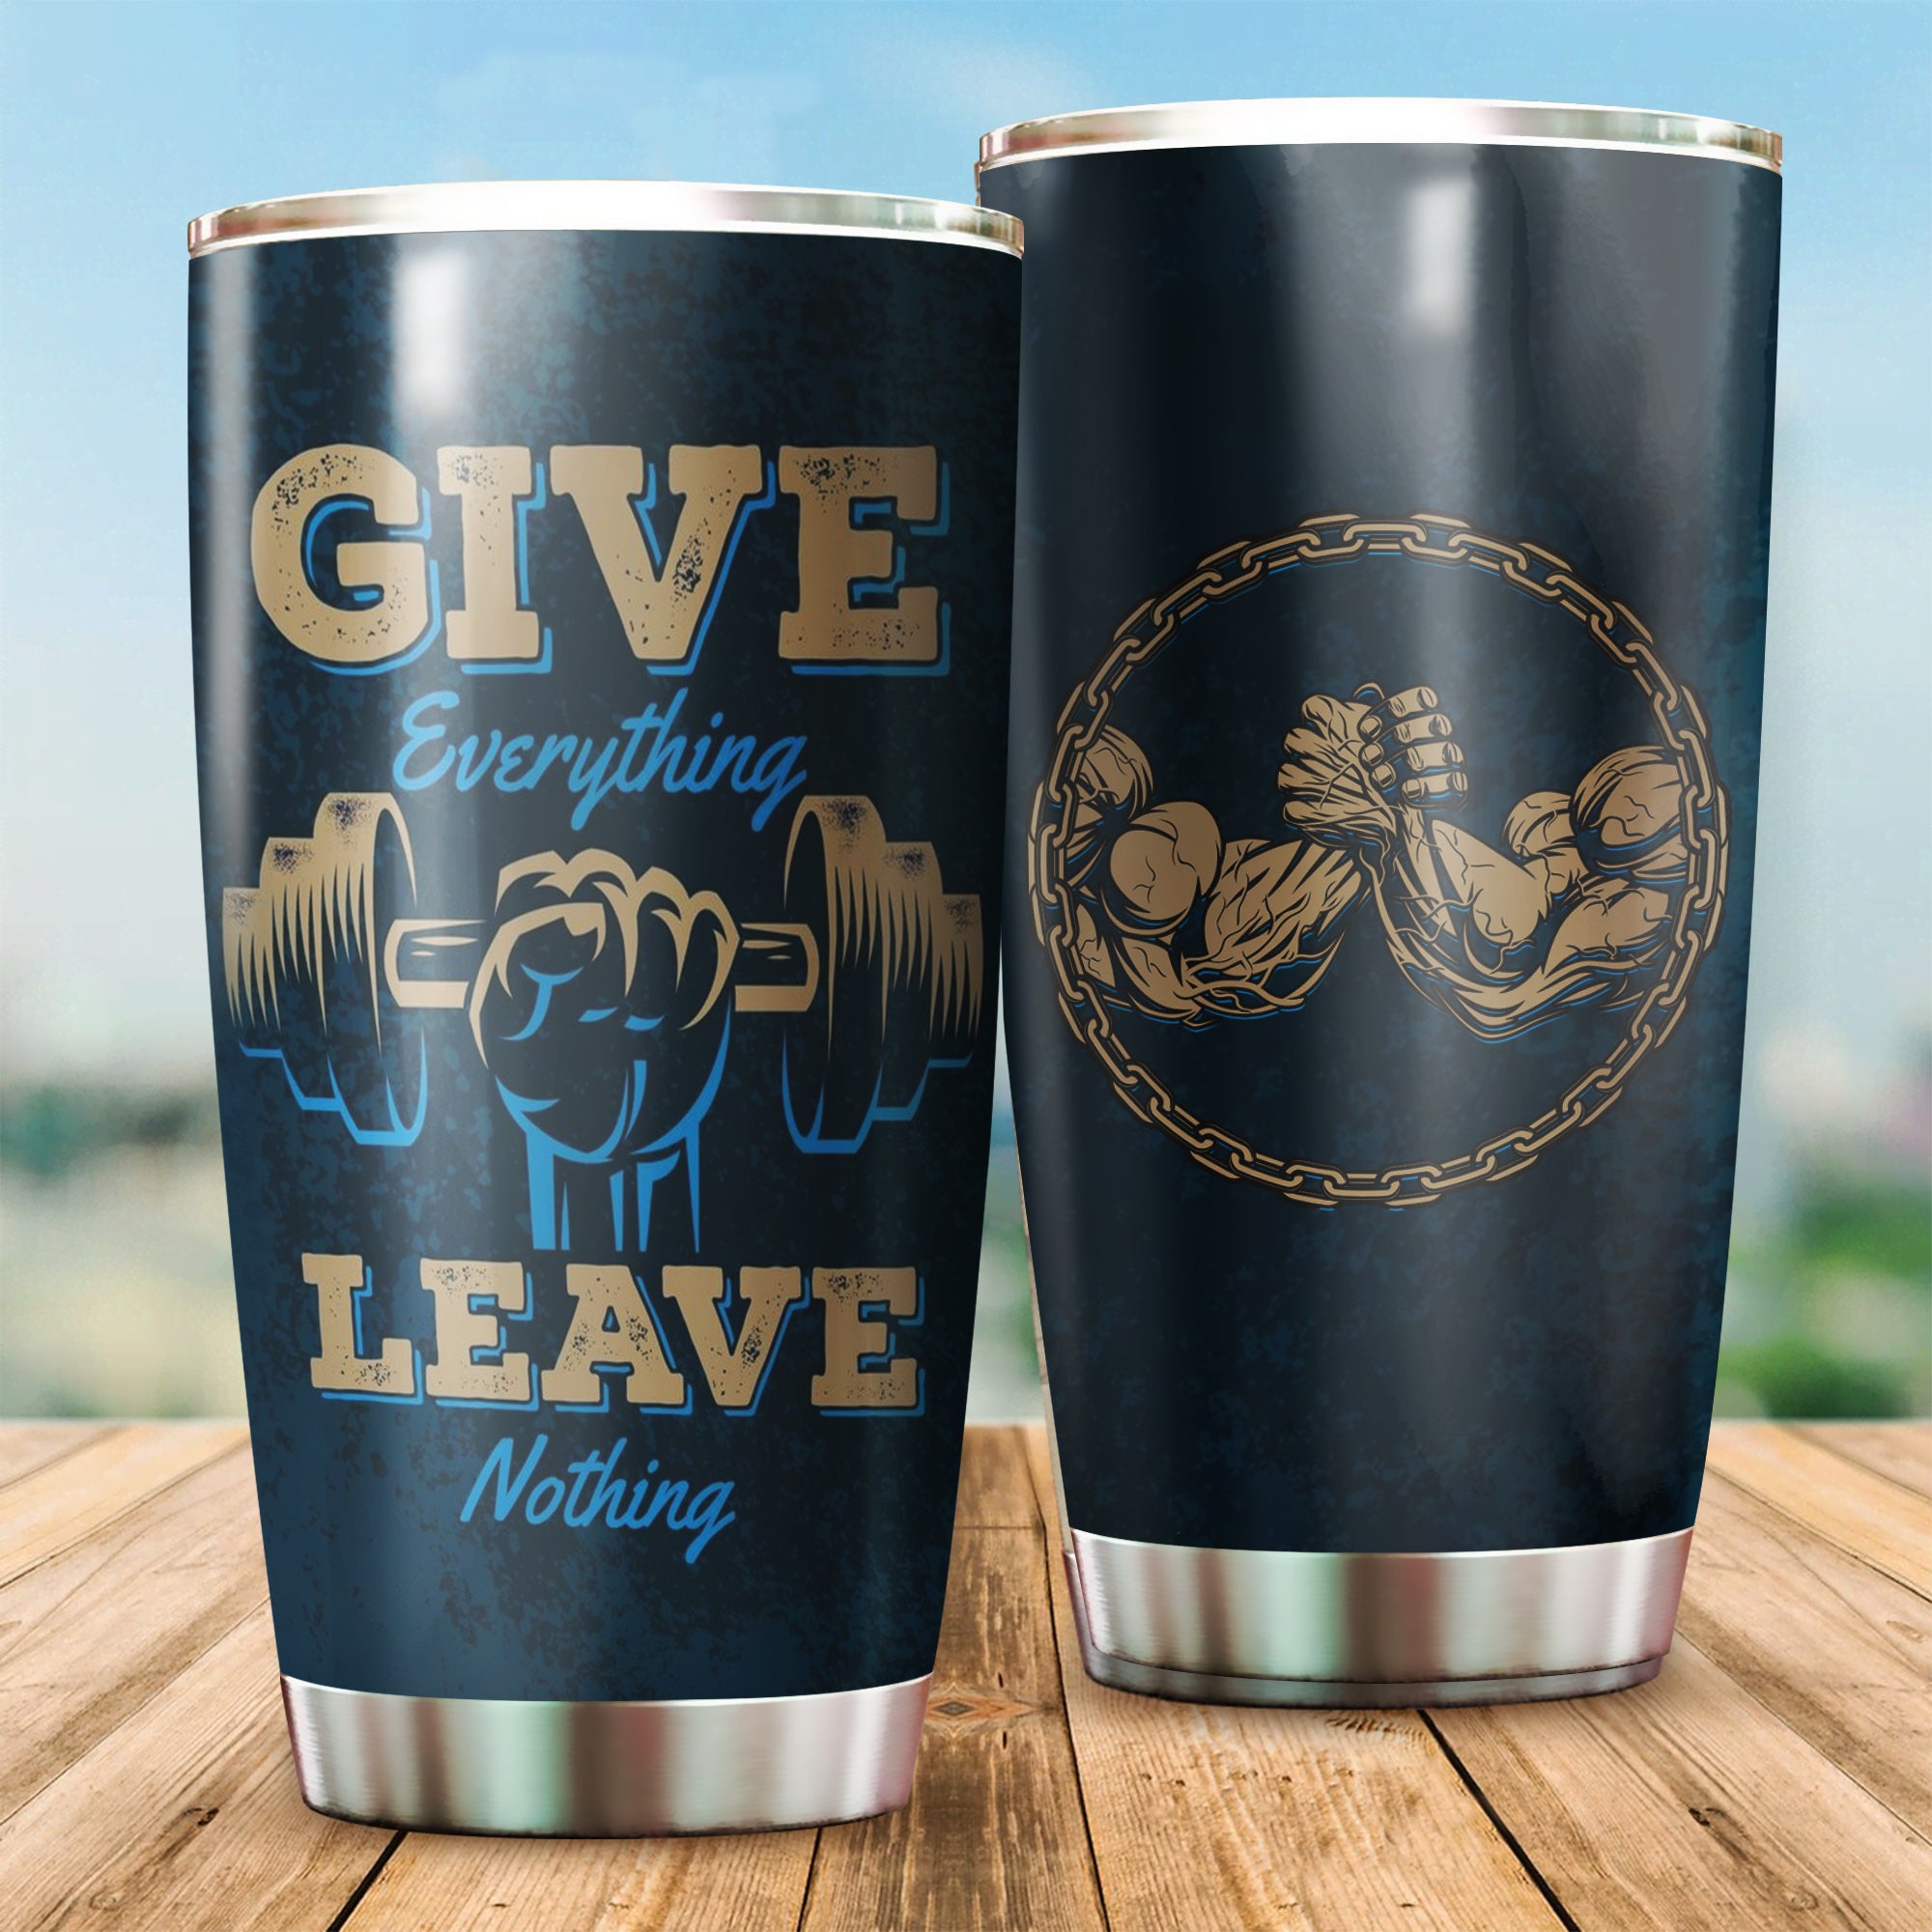 Functional Fitness Tumblers - Inspiring Gifts for Gym Lovers